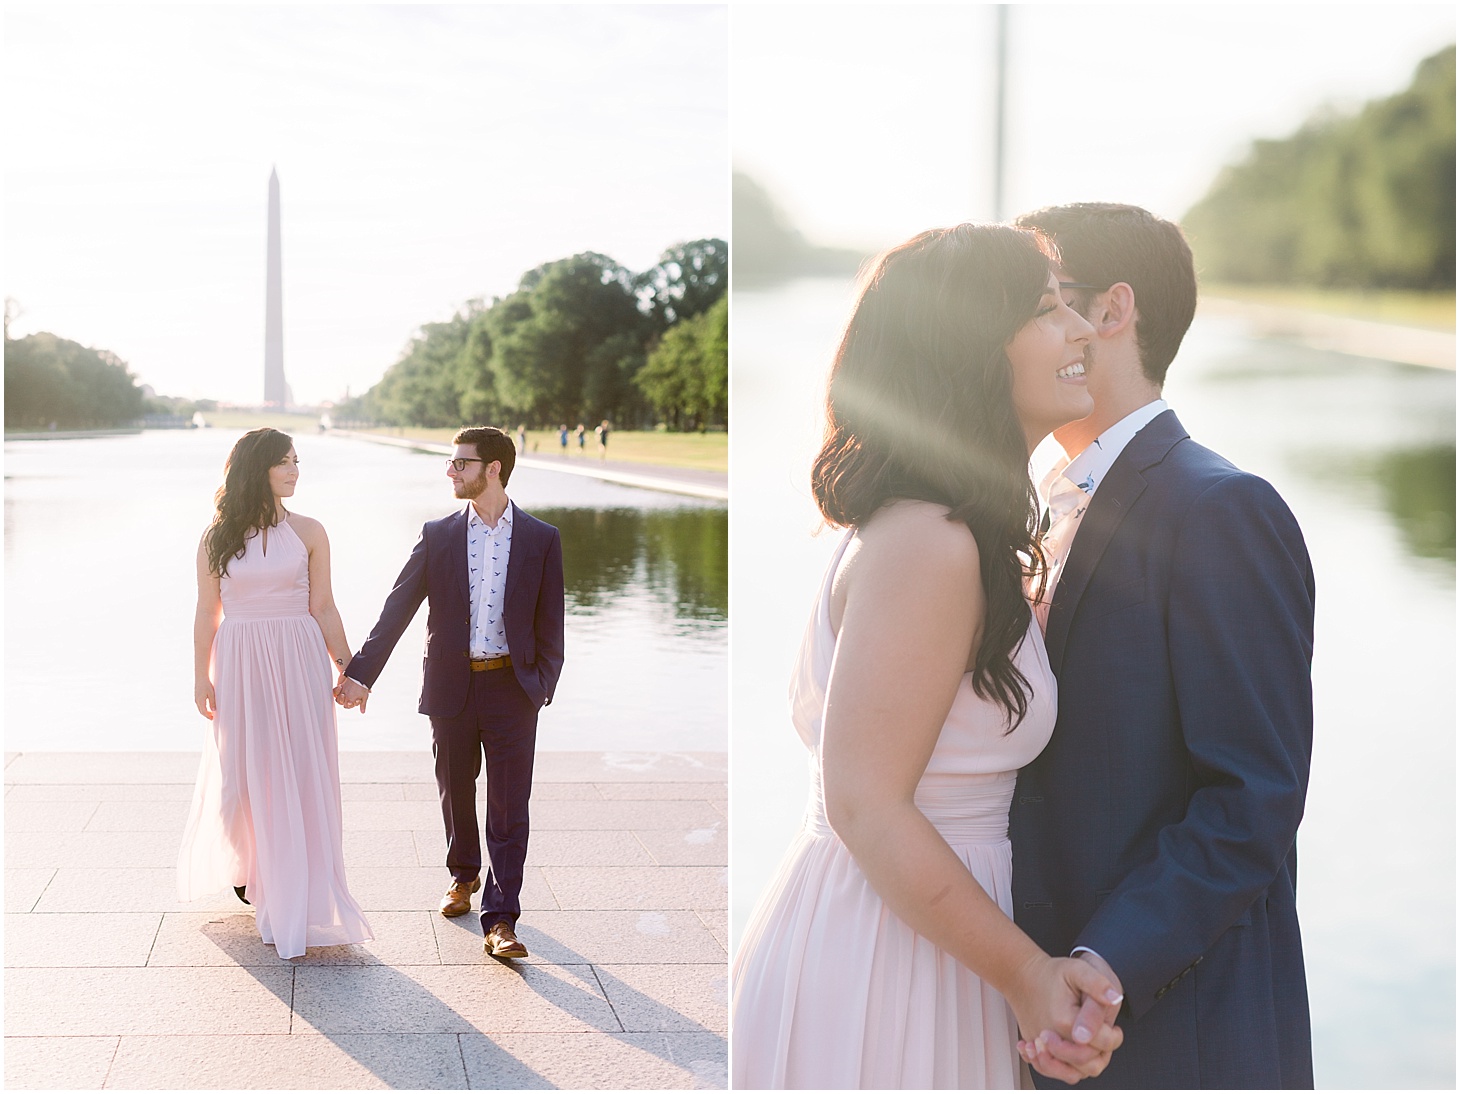 Engagement Portraits at the Lincoln Memorial Reflecting Pool | Romantic Sunrise Engagement Session at the Smithsonian Gardens | Sarah Bradshaw Photography